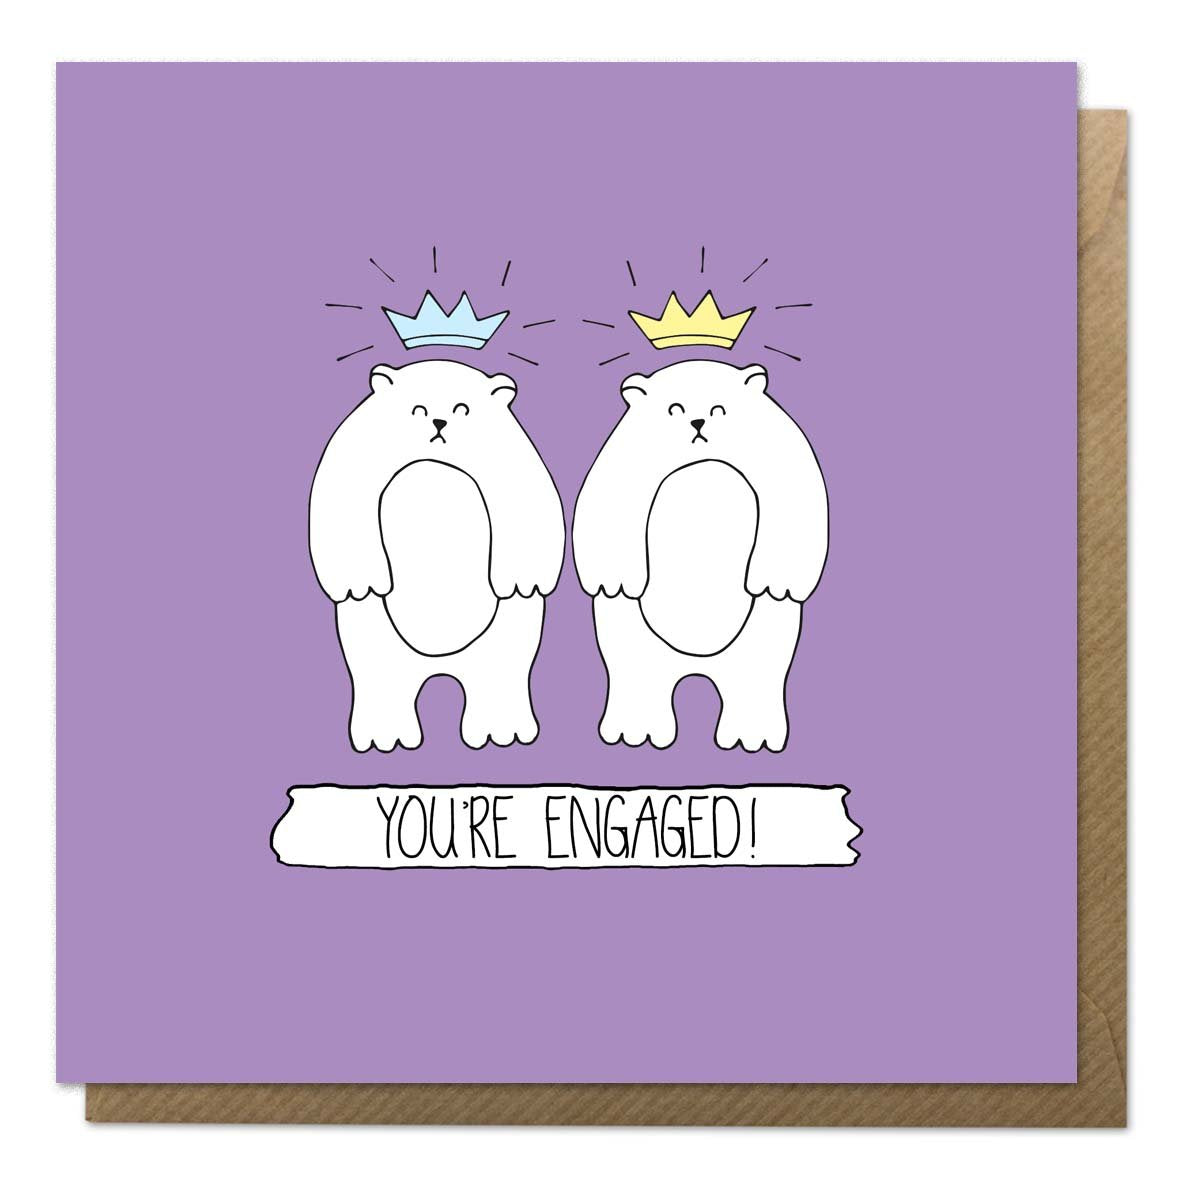 Purple engagement card with an illustration of two bears